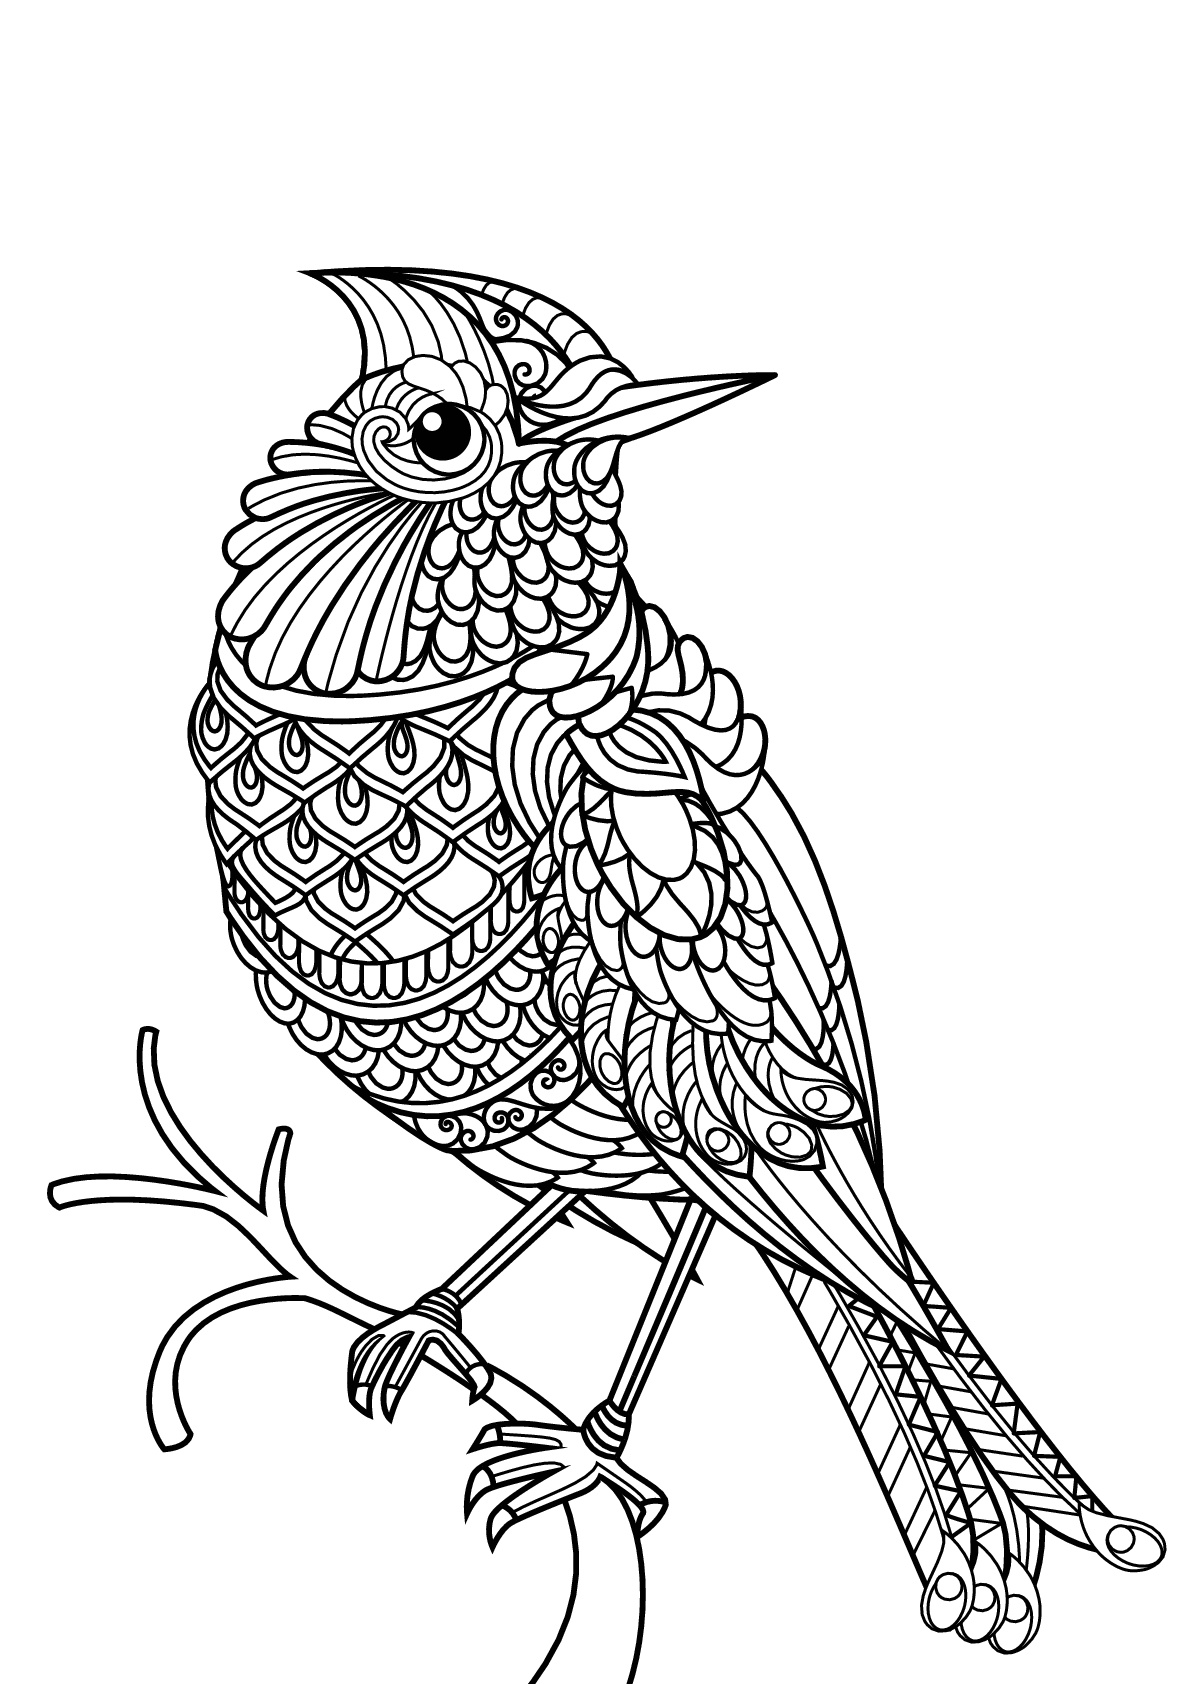 bird-birds-kids-coloring-pages